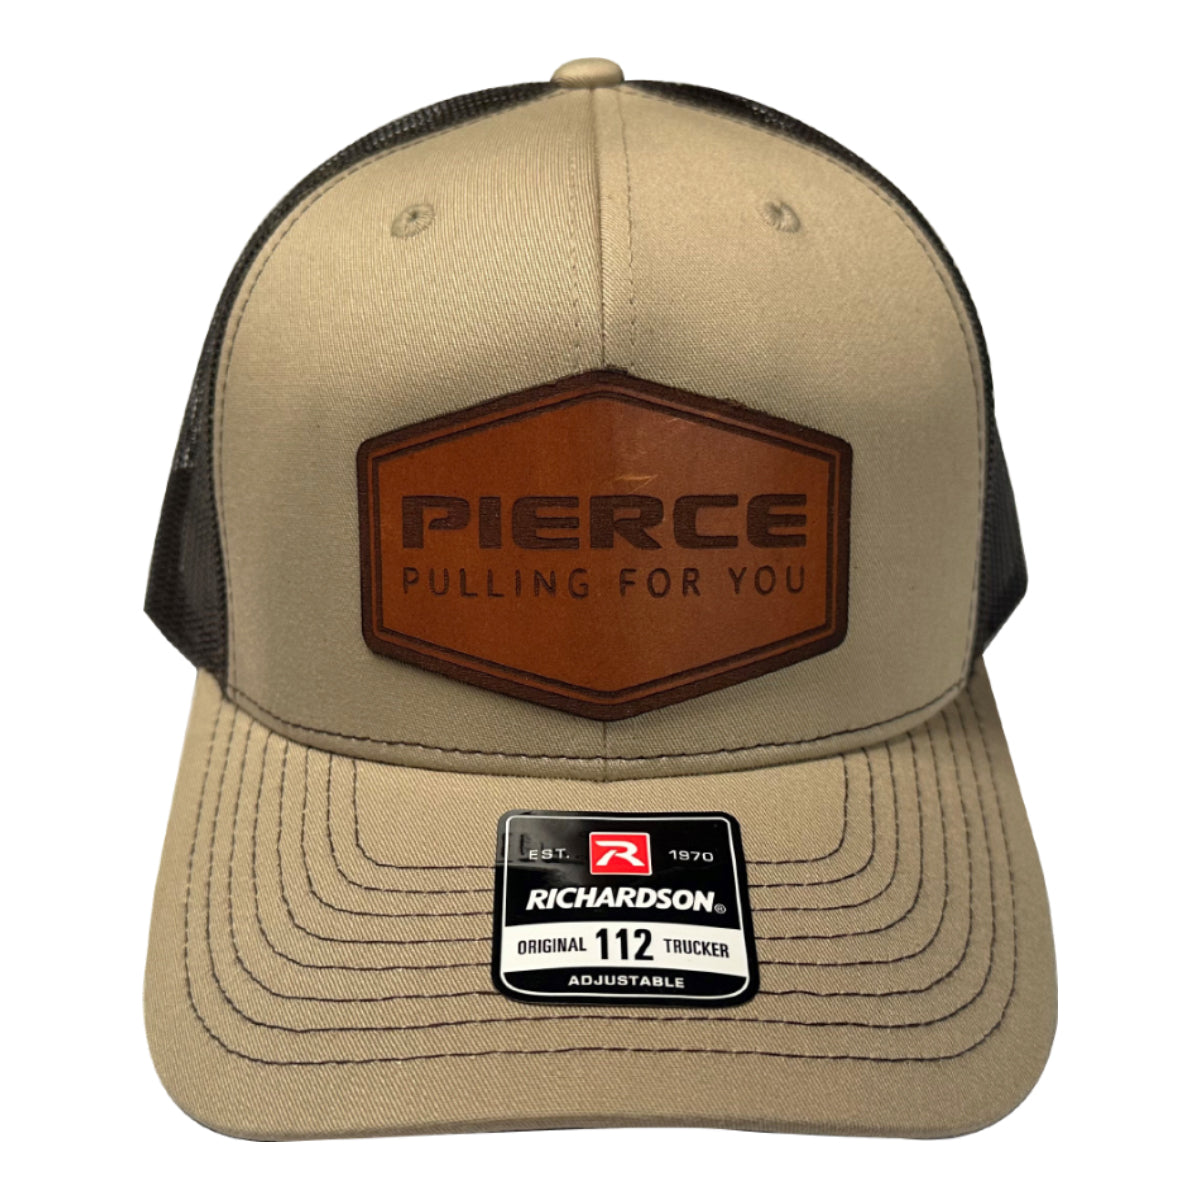 PIERCE Hat with Leather Patch